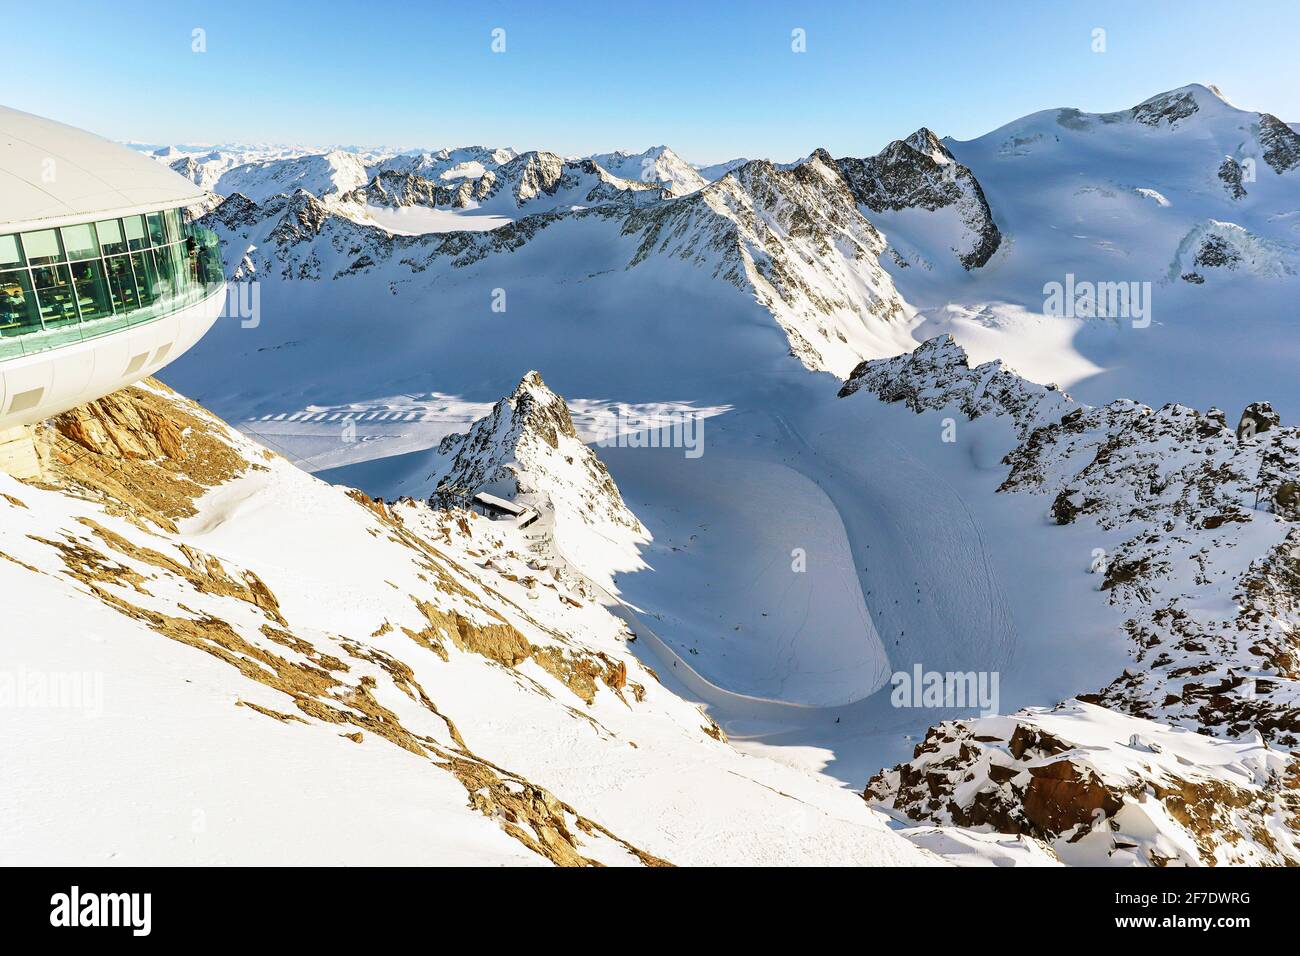 View from Pitztal glacier into the high alpine mountain landscape with cable car station and ski slope in winter with lots of snow and ice, Austrian A Stock Photo